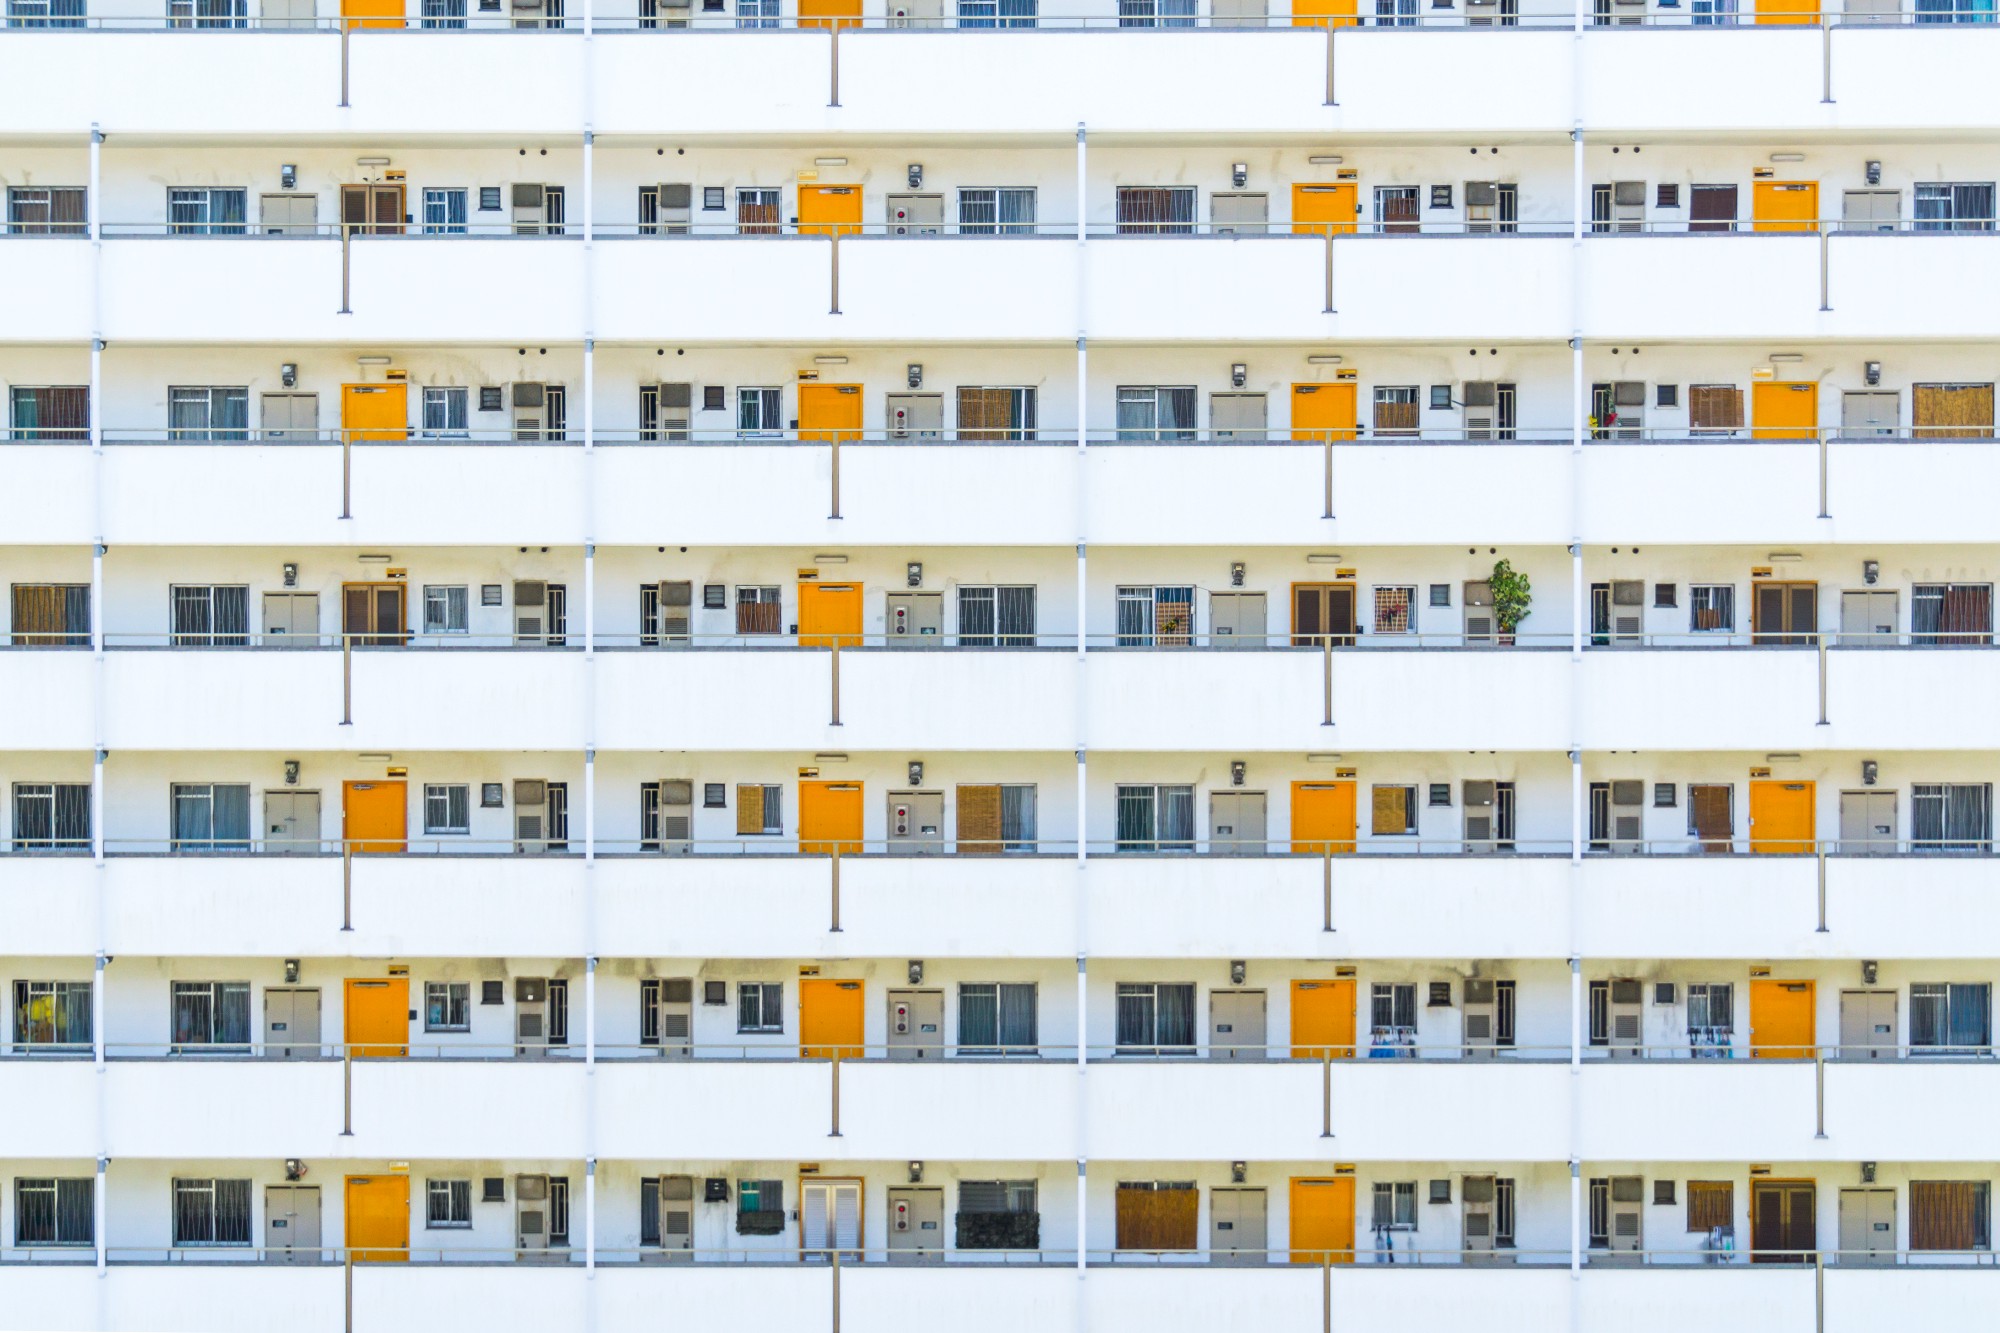 “The symmetrical apartment units with orange doors in Osaka“ by Tim Easley on Unsplash